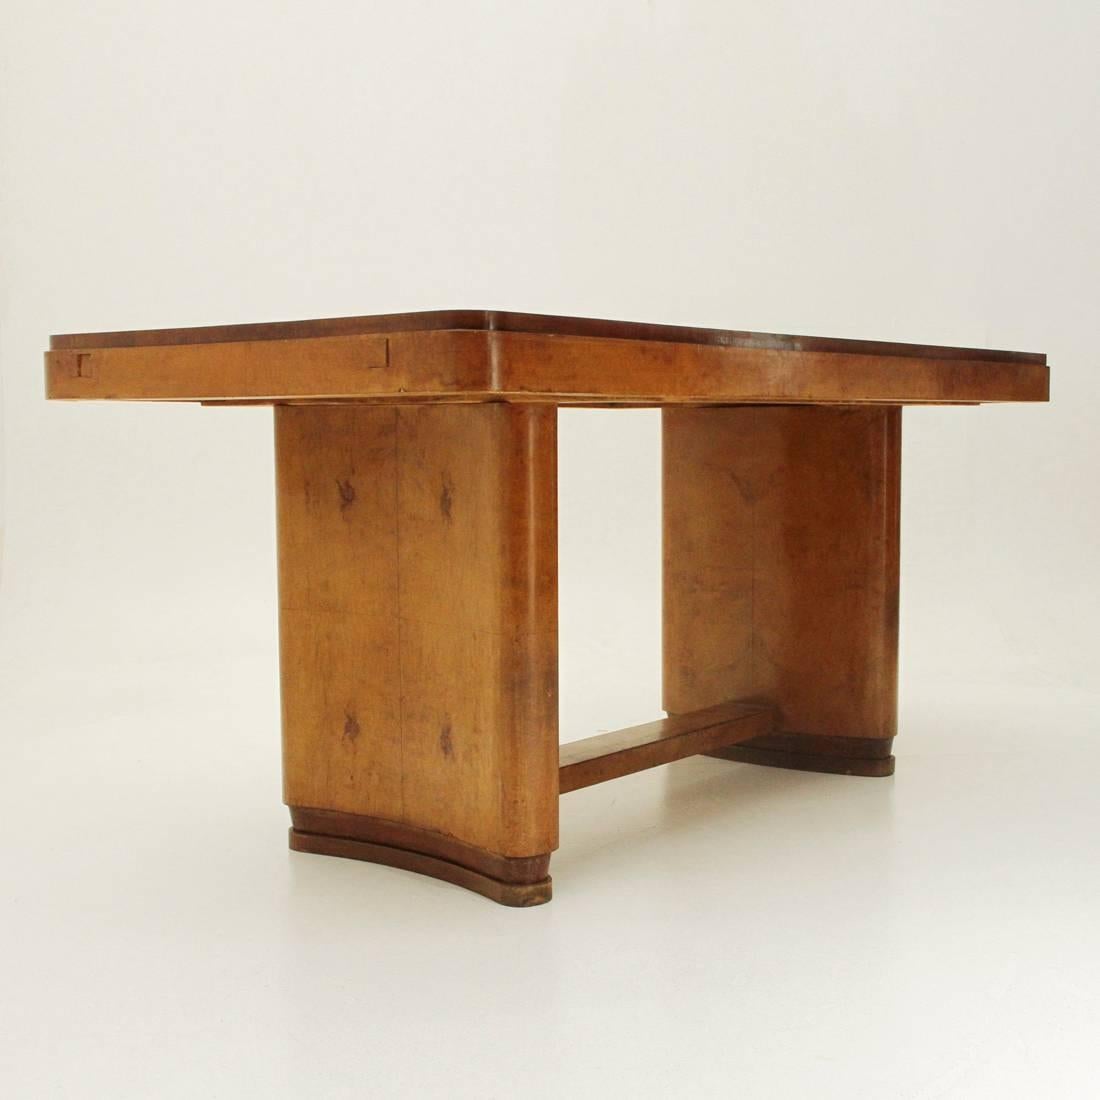 1940s table of Italian manufacture.
Structure formed by two half-moon shaped bases in wood veneered in briarwood joined by a wooden partition.
Rectangular top with rounded corners in veneered wood.
Telescopic rods to extend the plan. Extensions